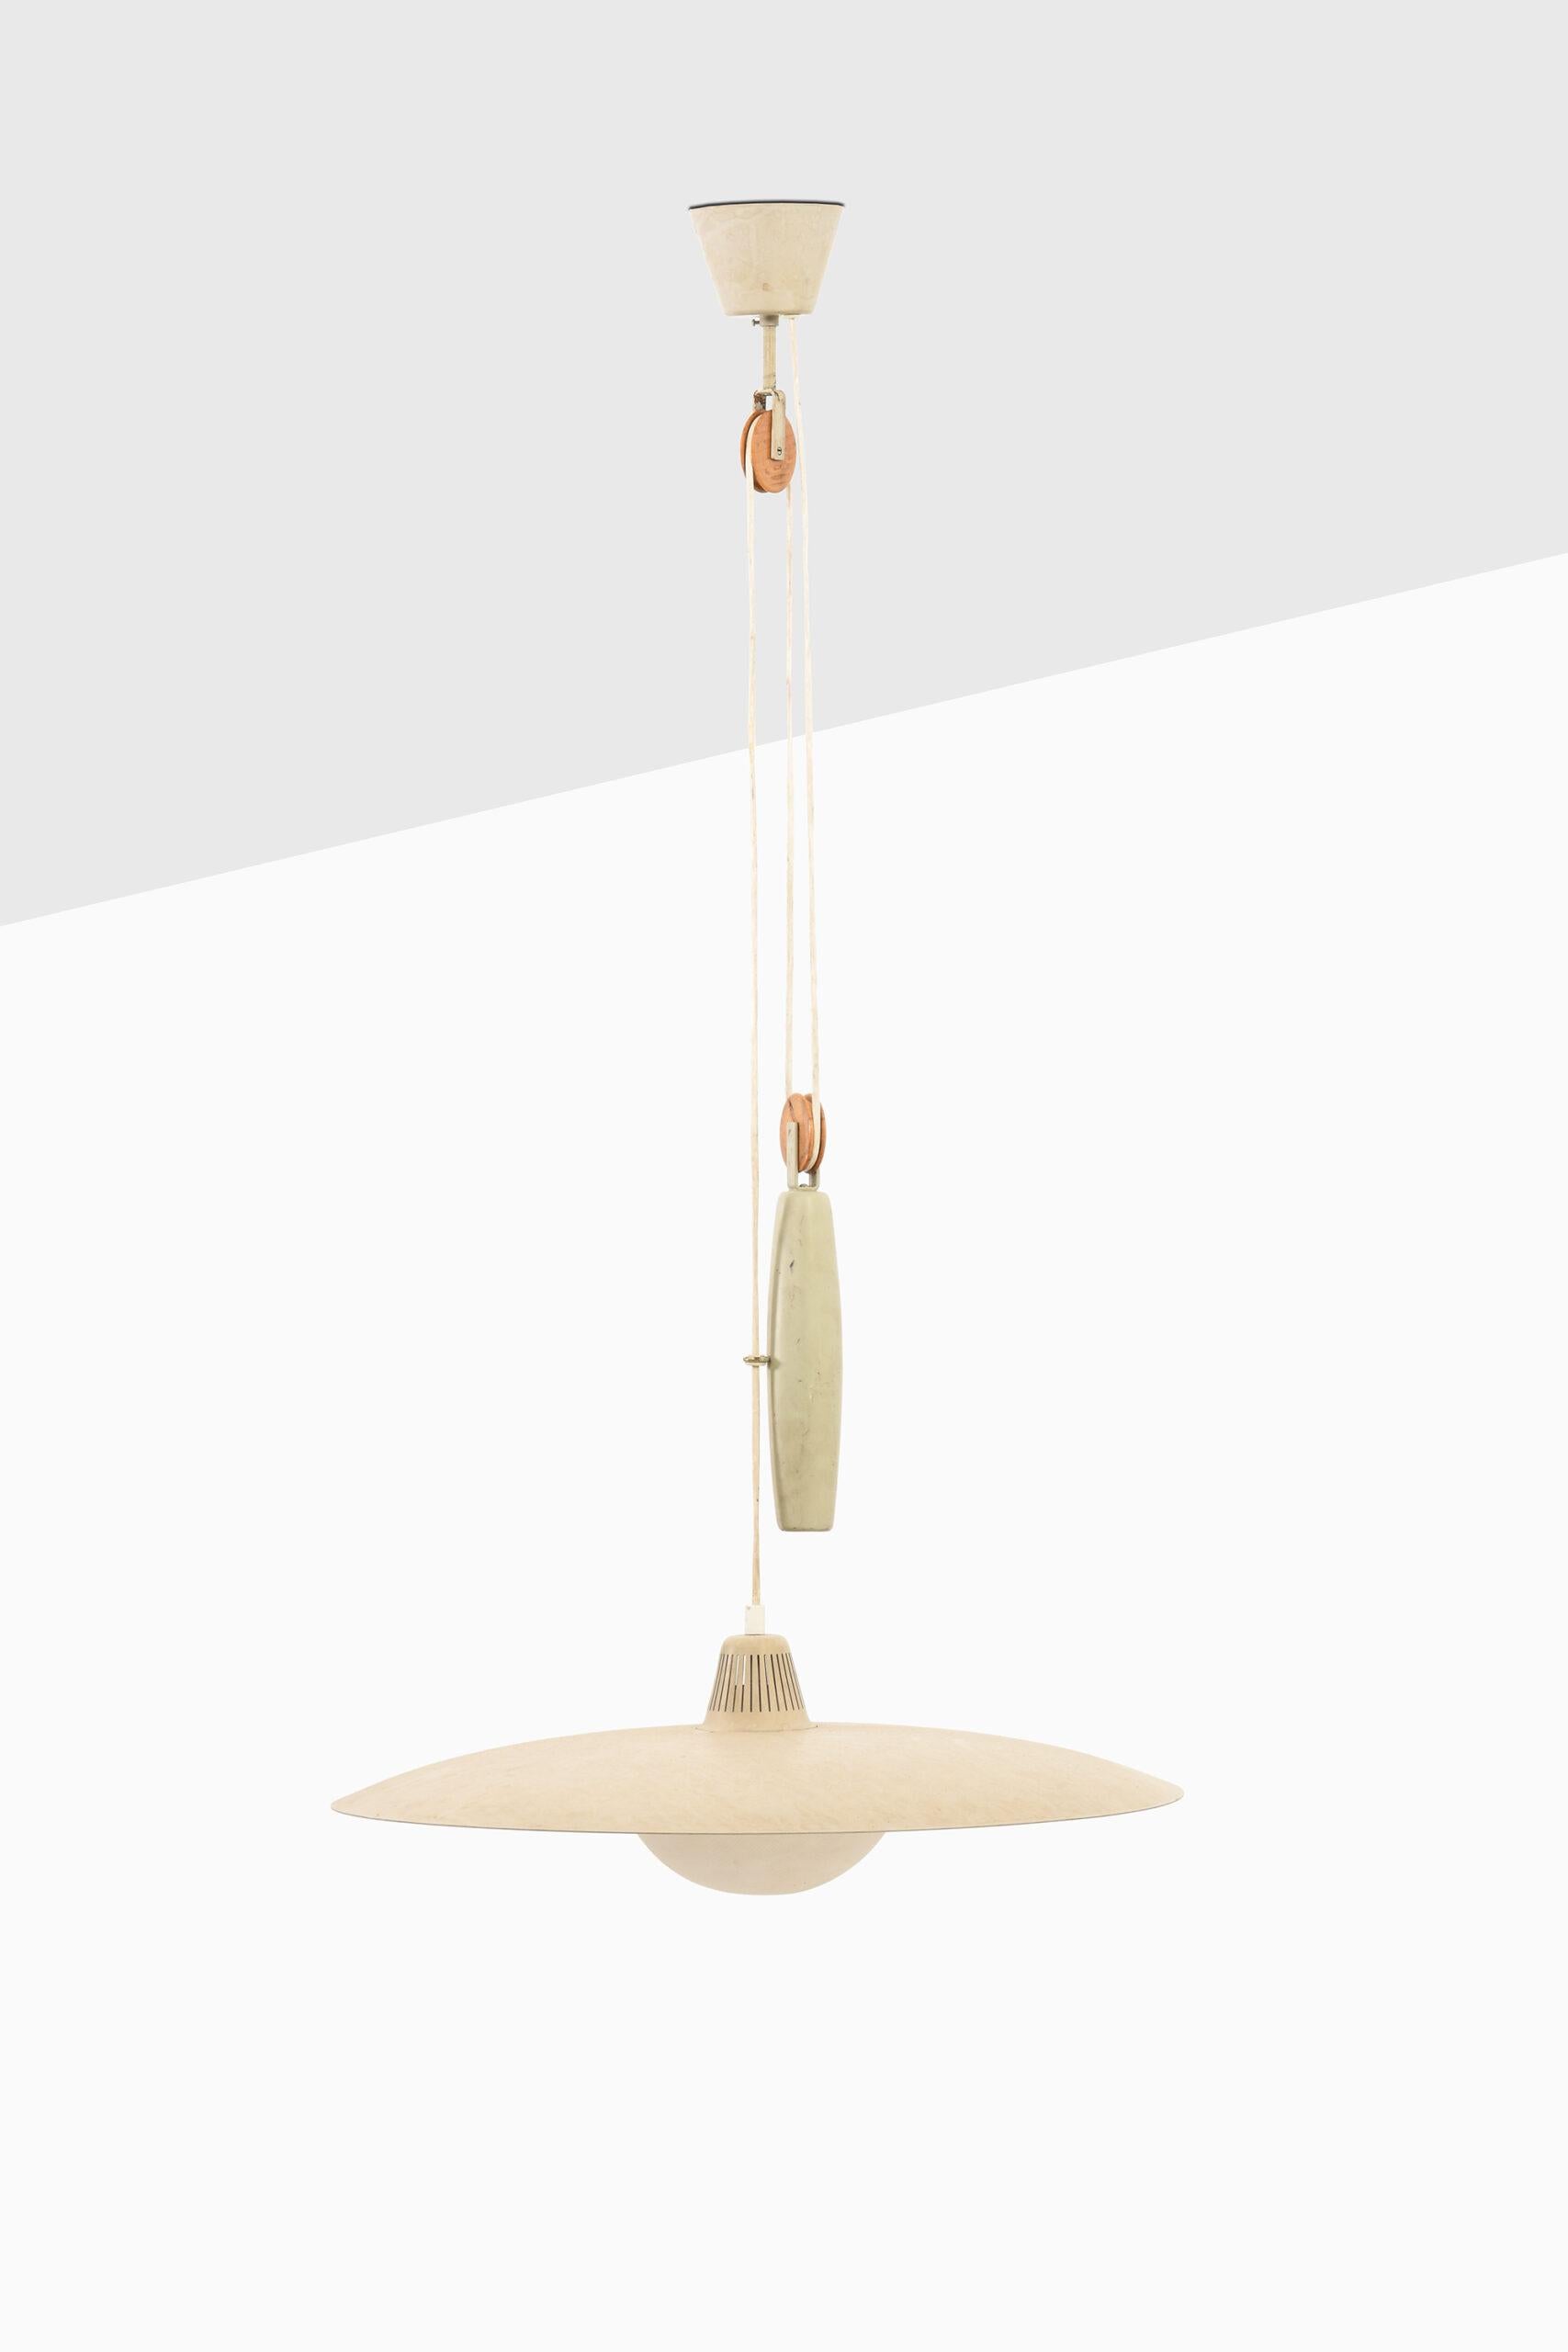 Mid-20th Century Ceiling Lamp Produced by Bergbom in Sweden For Sale